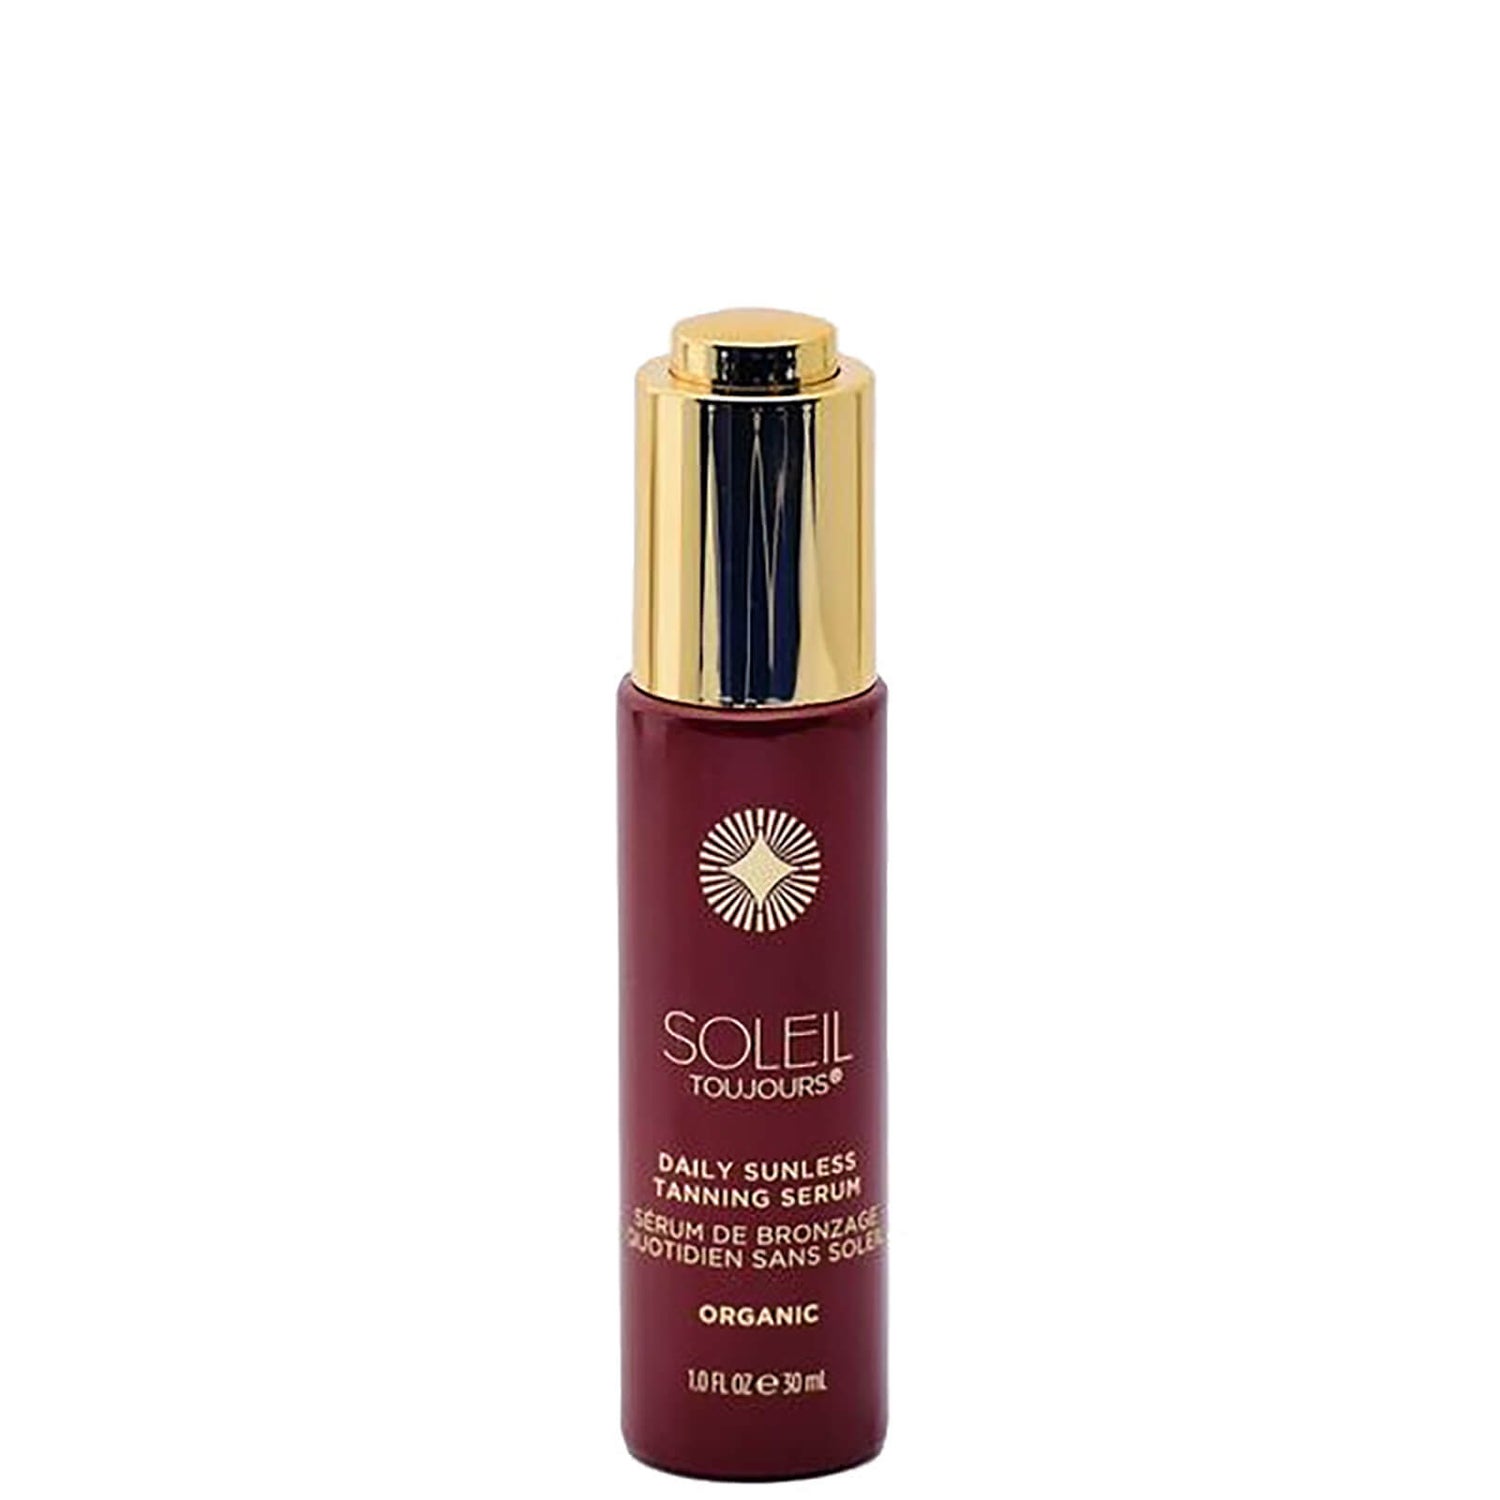 Soleil Toujours Daily Sunless Tanning Serum 1 fl. oz.